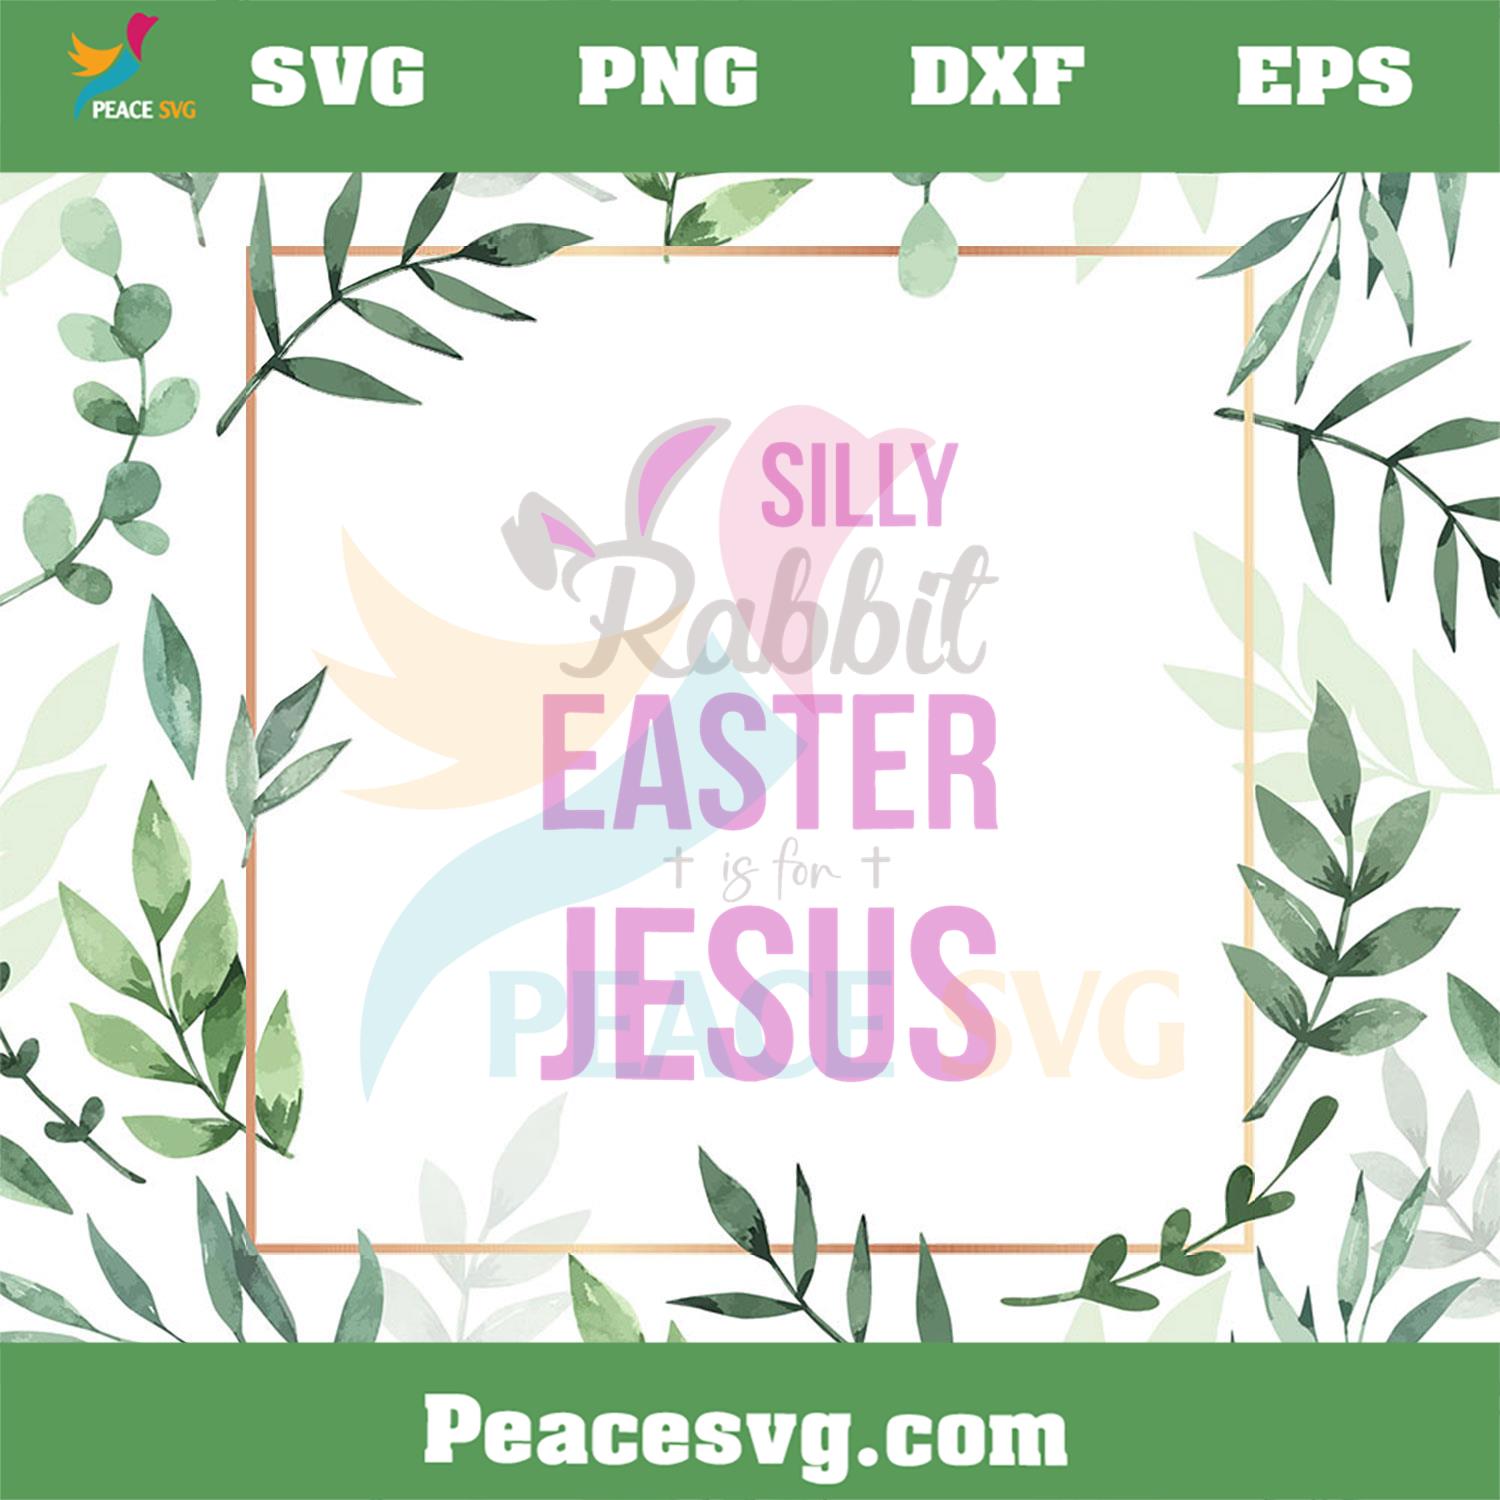 Silly Rabbit Easter Is For Jesus Bunny Ear SVG Cutting Files